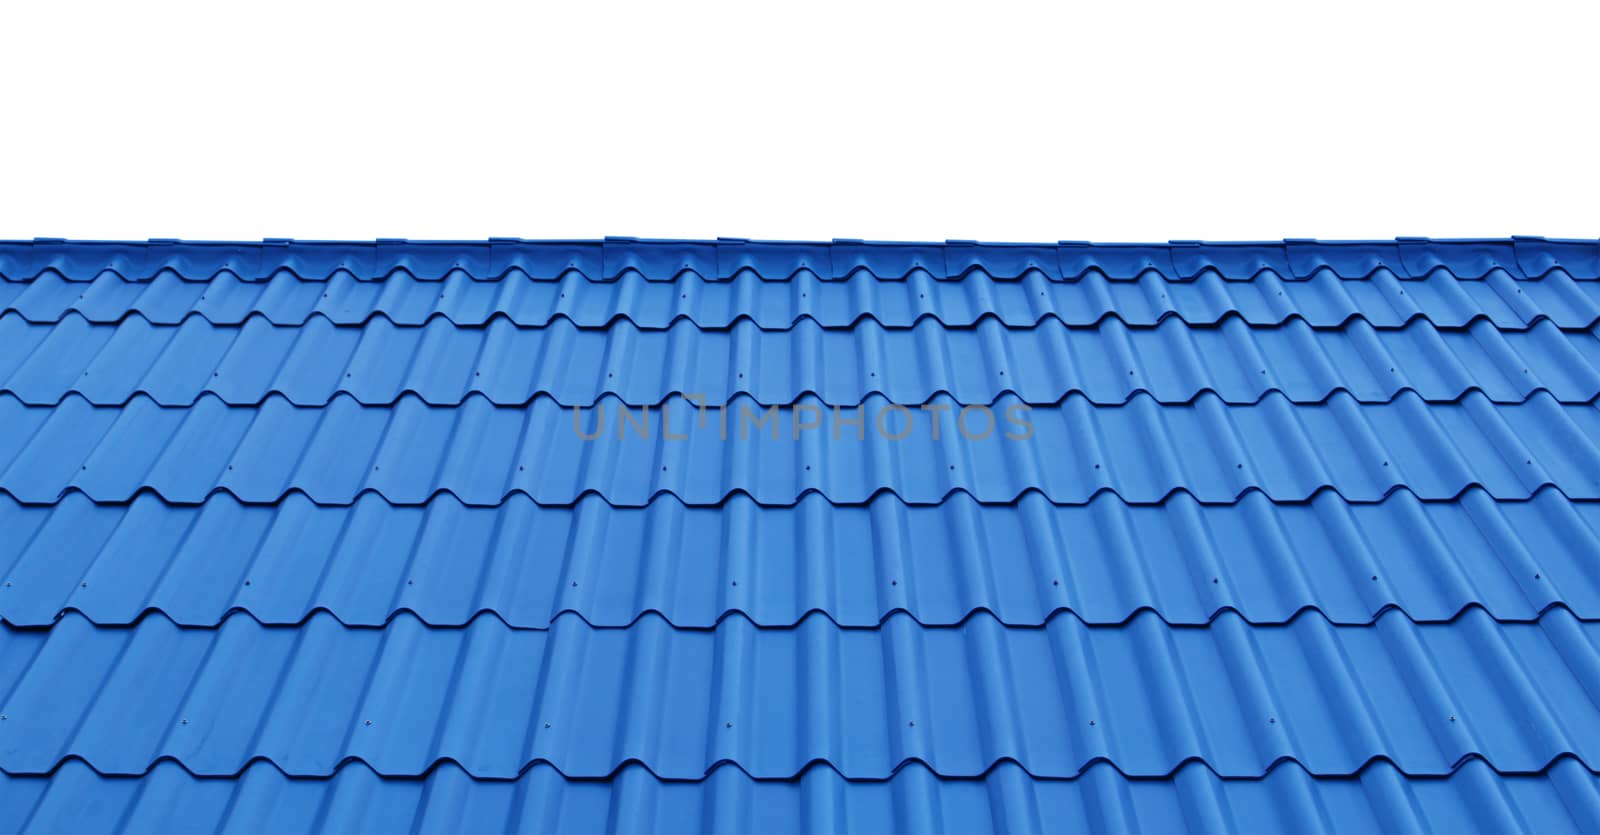 Blue Roof by foto76